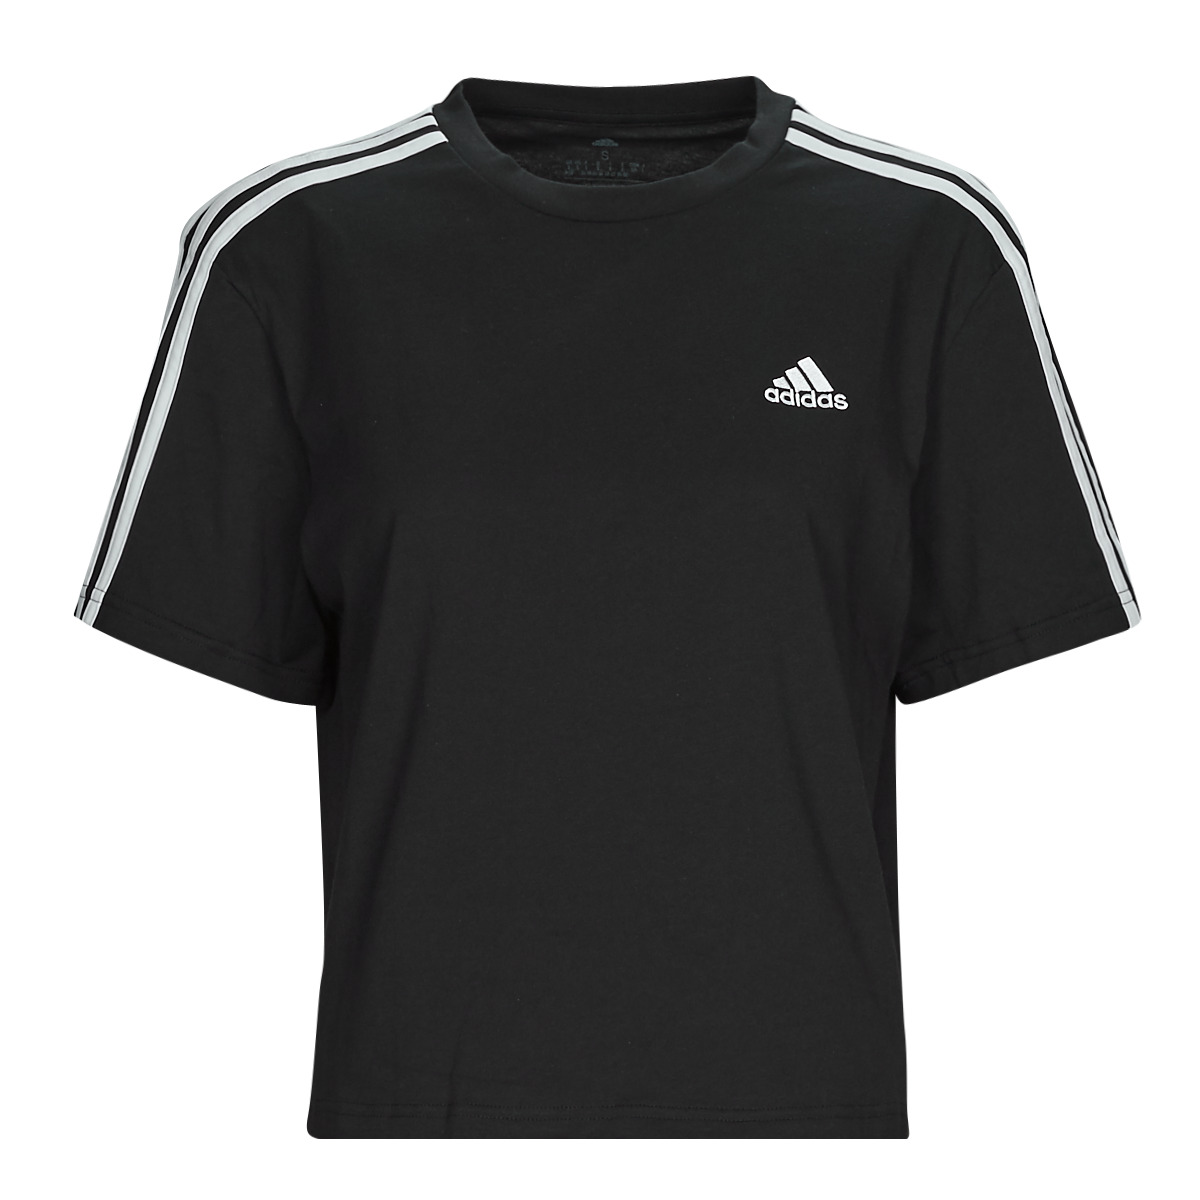 Women delivery Spartoo Black short-sleeved - Adidas 24,80 TOP CR Europe Clothing t-shirts Fast € - ! 3S Sportswear |